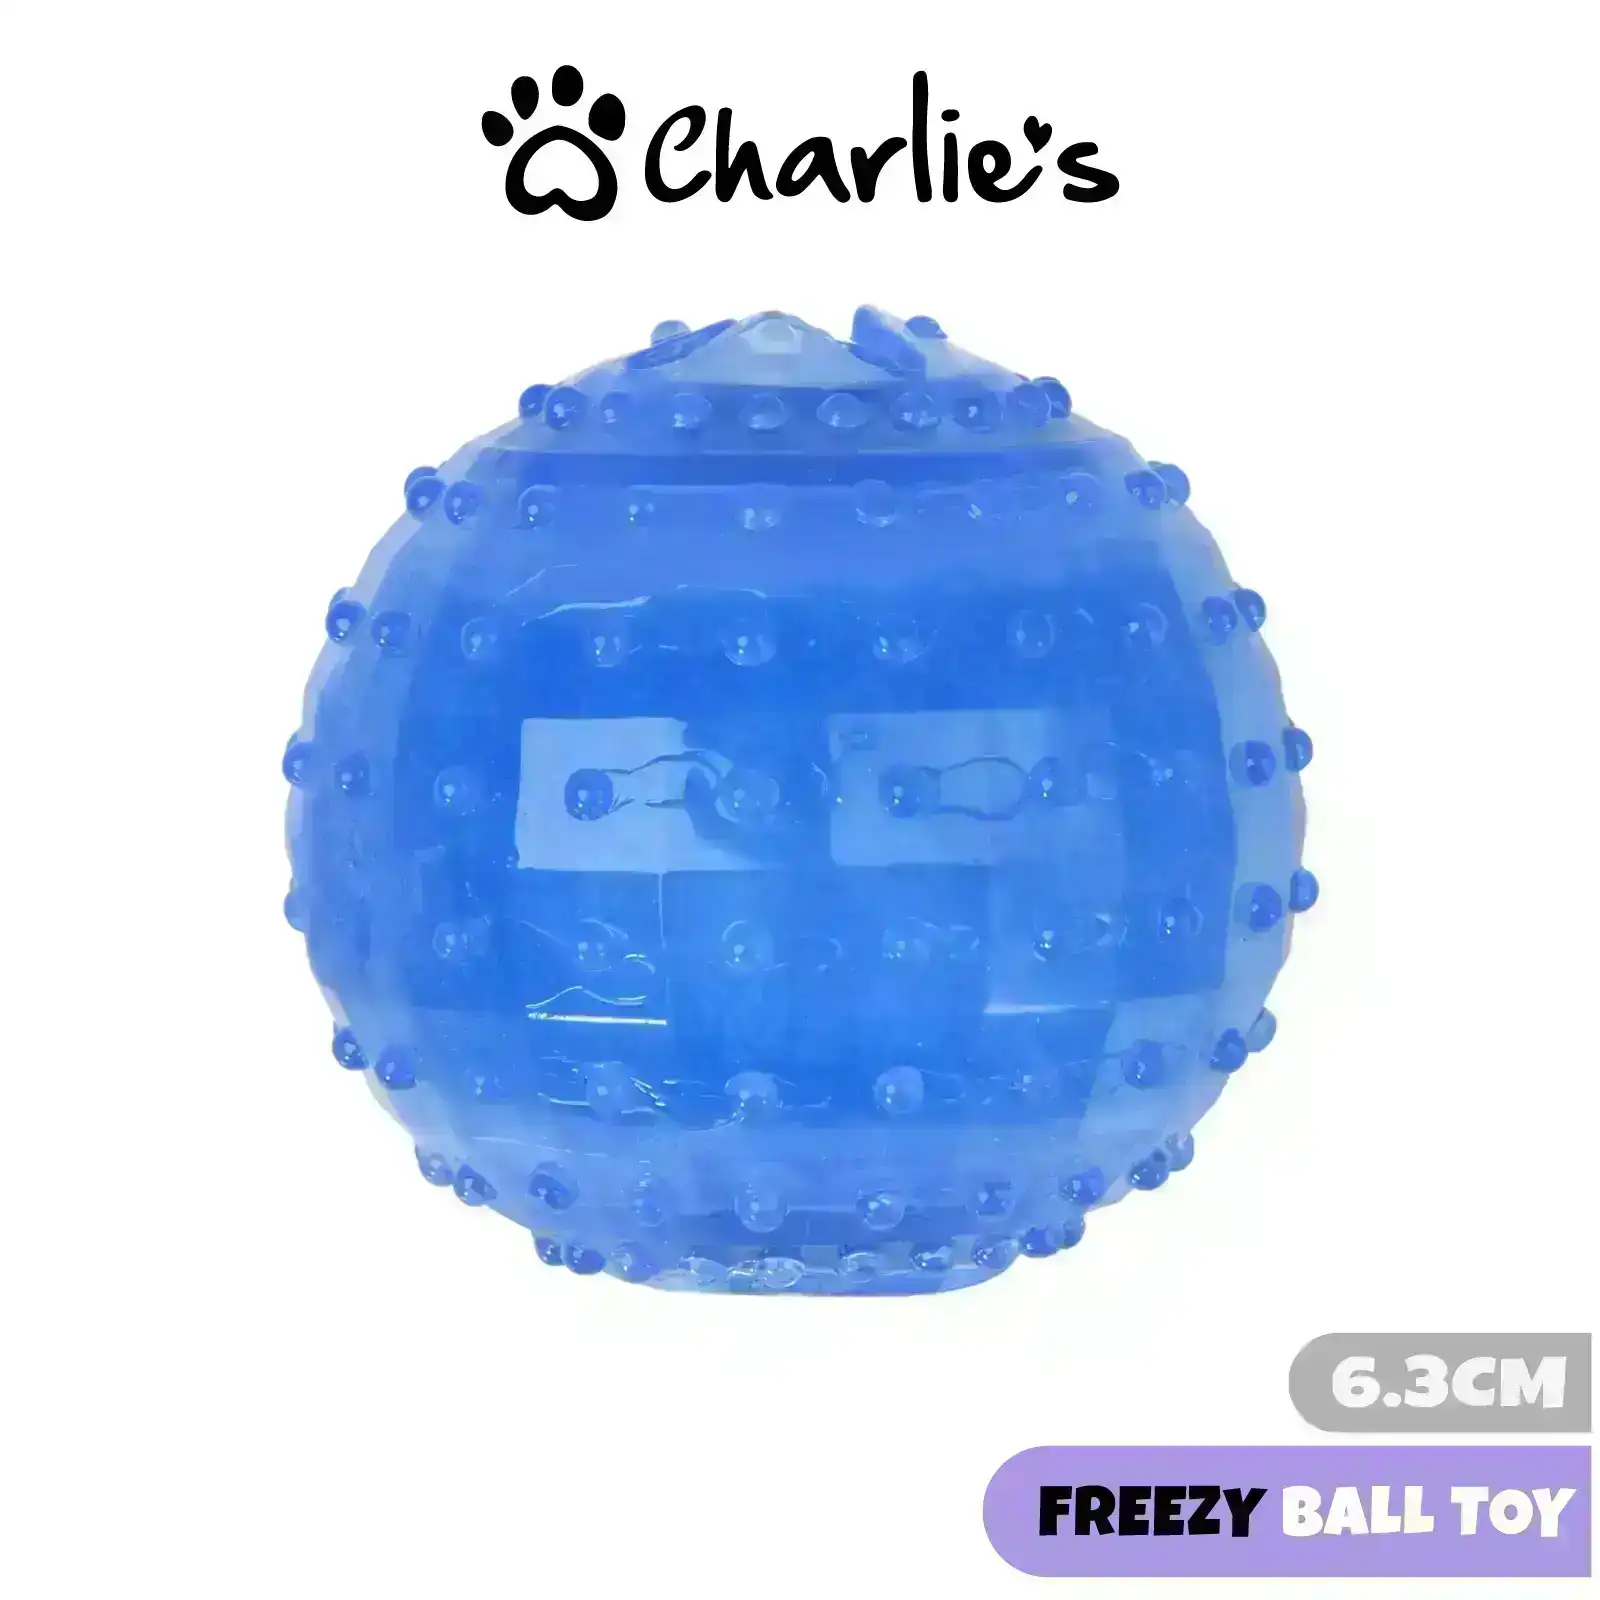 Charlie's Freezy Ball Toy Blue 6.3cm